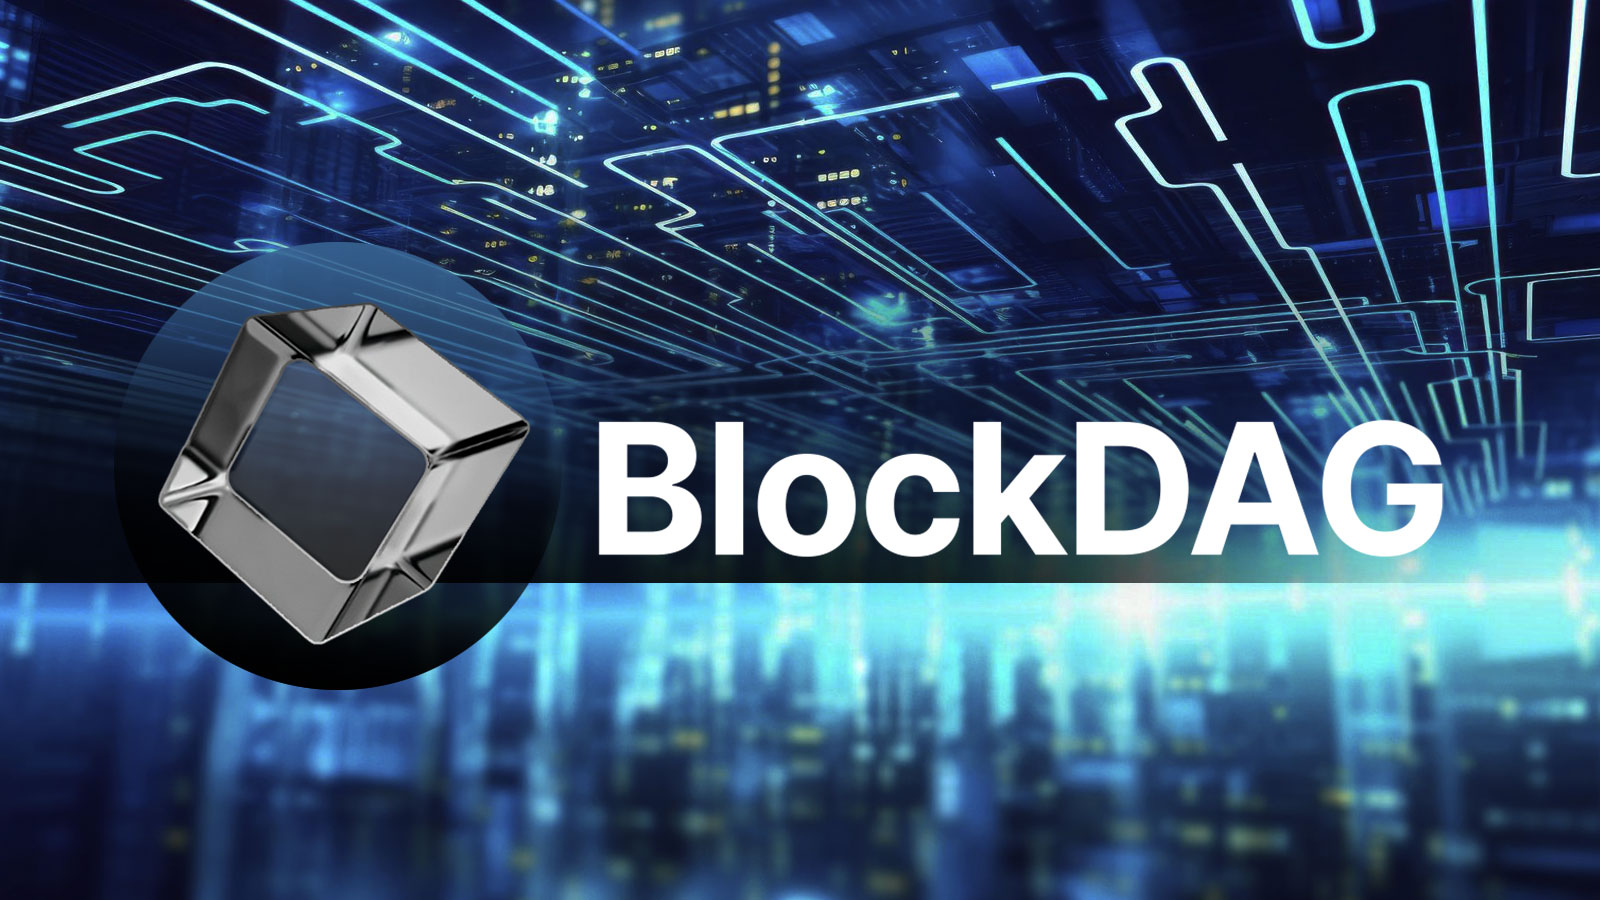 BlockDAG (BDAG) Token Pre-Sale Tracked by Investors and Analysts in Late April